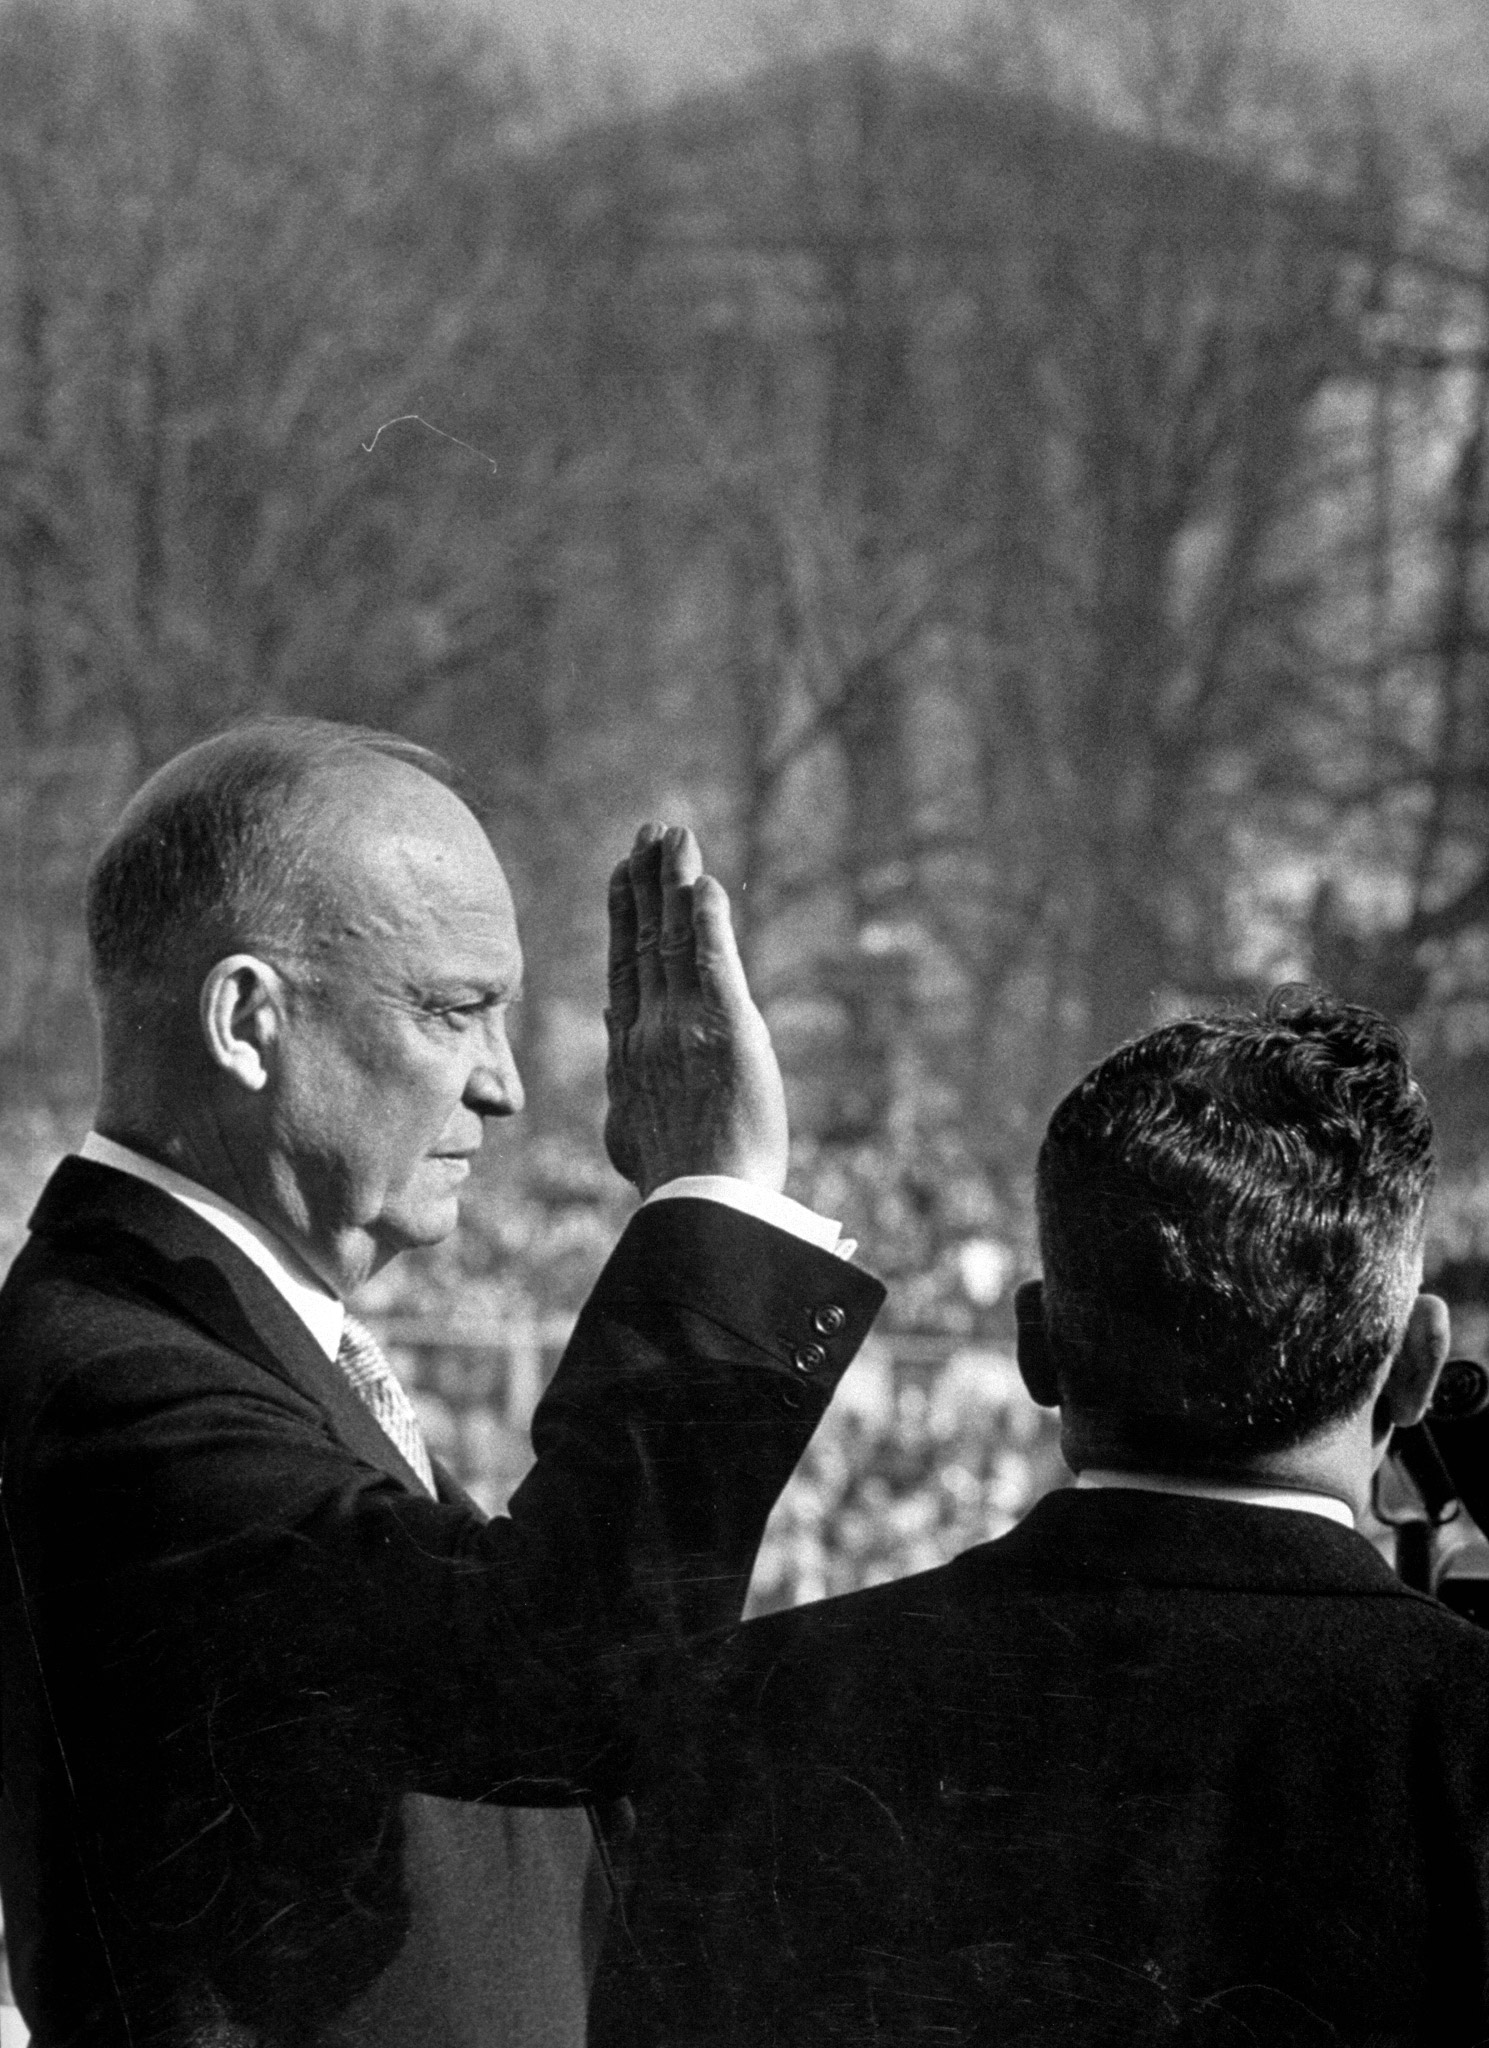 Dwight D. Eisenhower taking his first oath of office during inauguration, 1953. (Mark Kauffman—The LIFE Picture Collection/Getty Images)